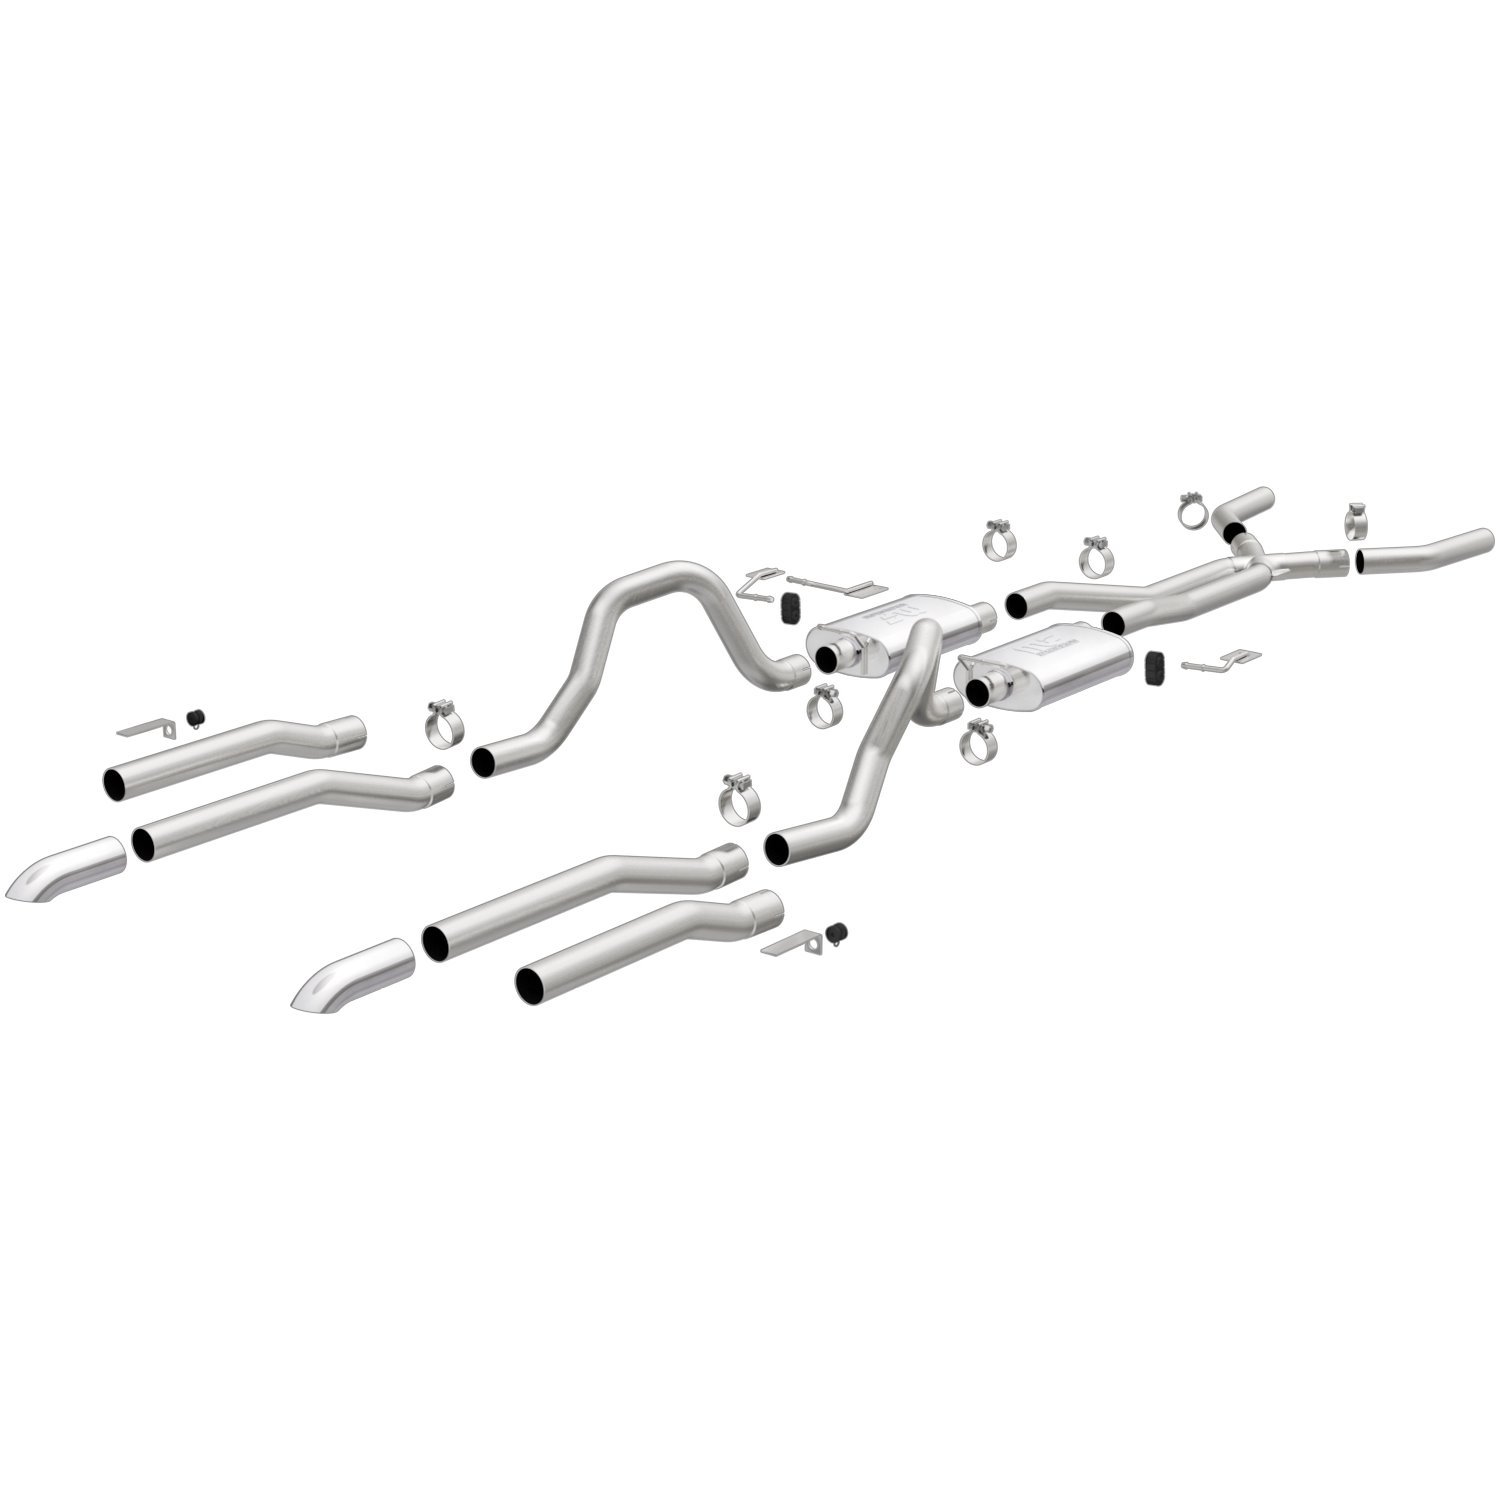 Street Series Crossmember-Back Exhaust System Fits Select Classic Chrysler/Dodge/Plymouth Models